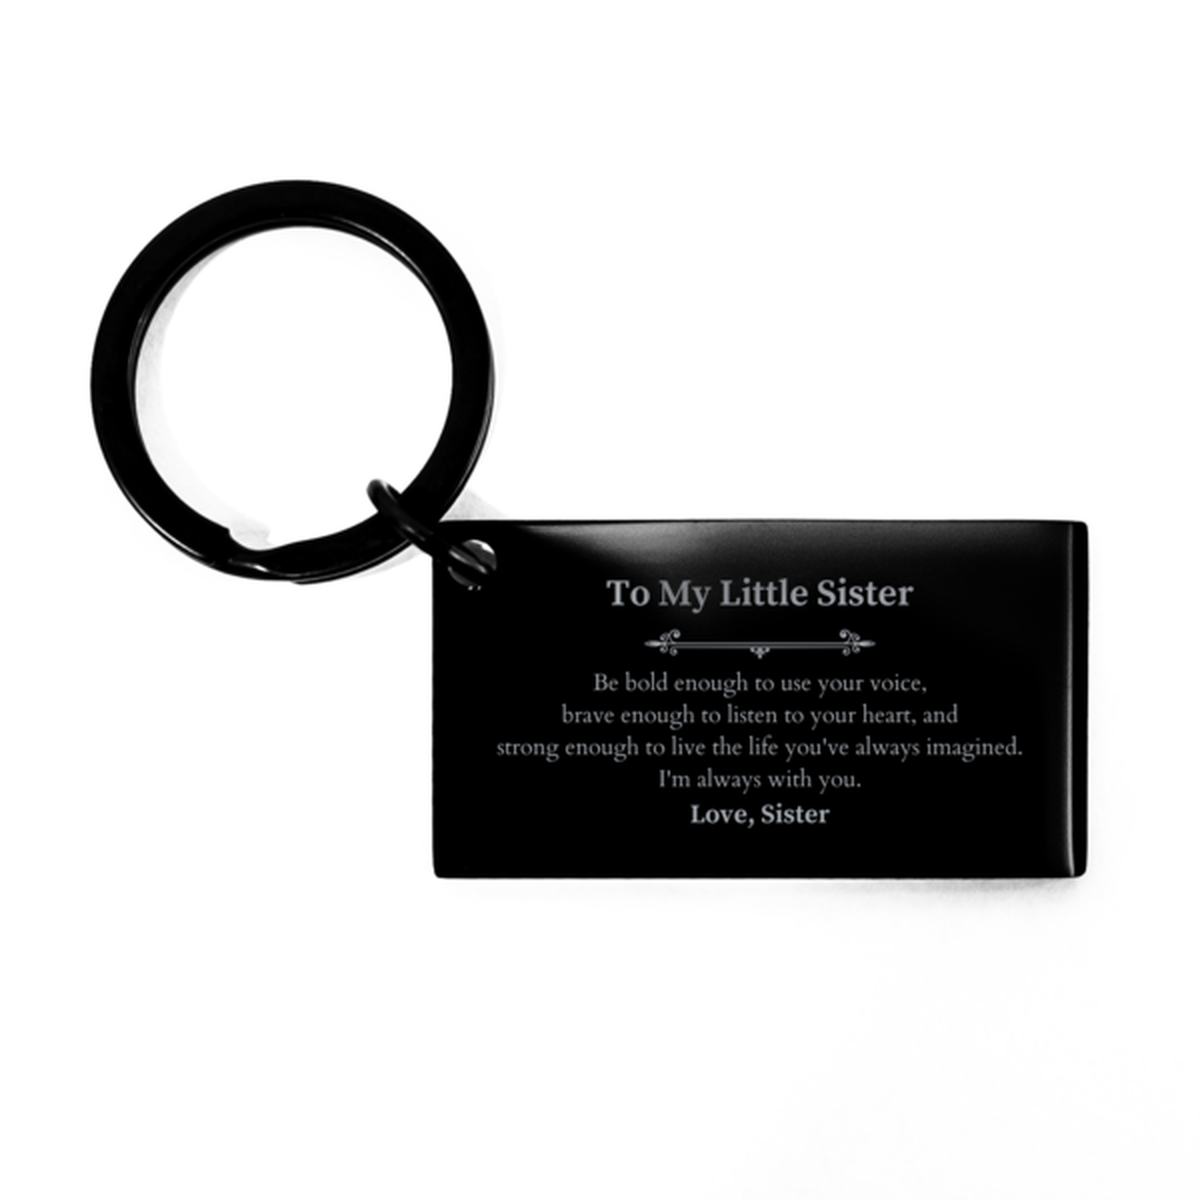 Keepsake Little Sister Keychain Gift Idea Graduation Christmas Birthday Little Sister from Sister, Little Sister Be bold enough to use your voice, brave enough to listen to your heart. Love, Sister